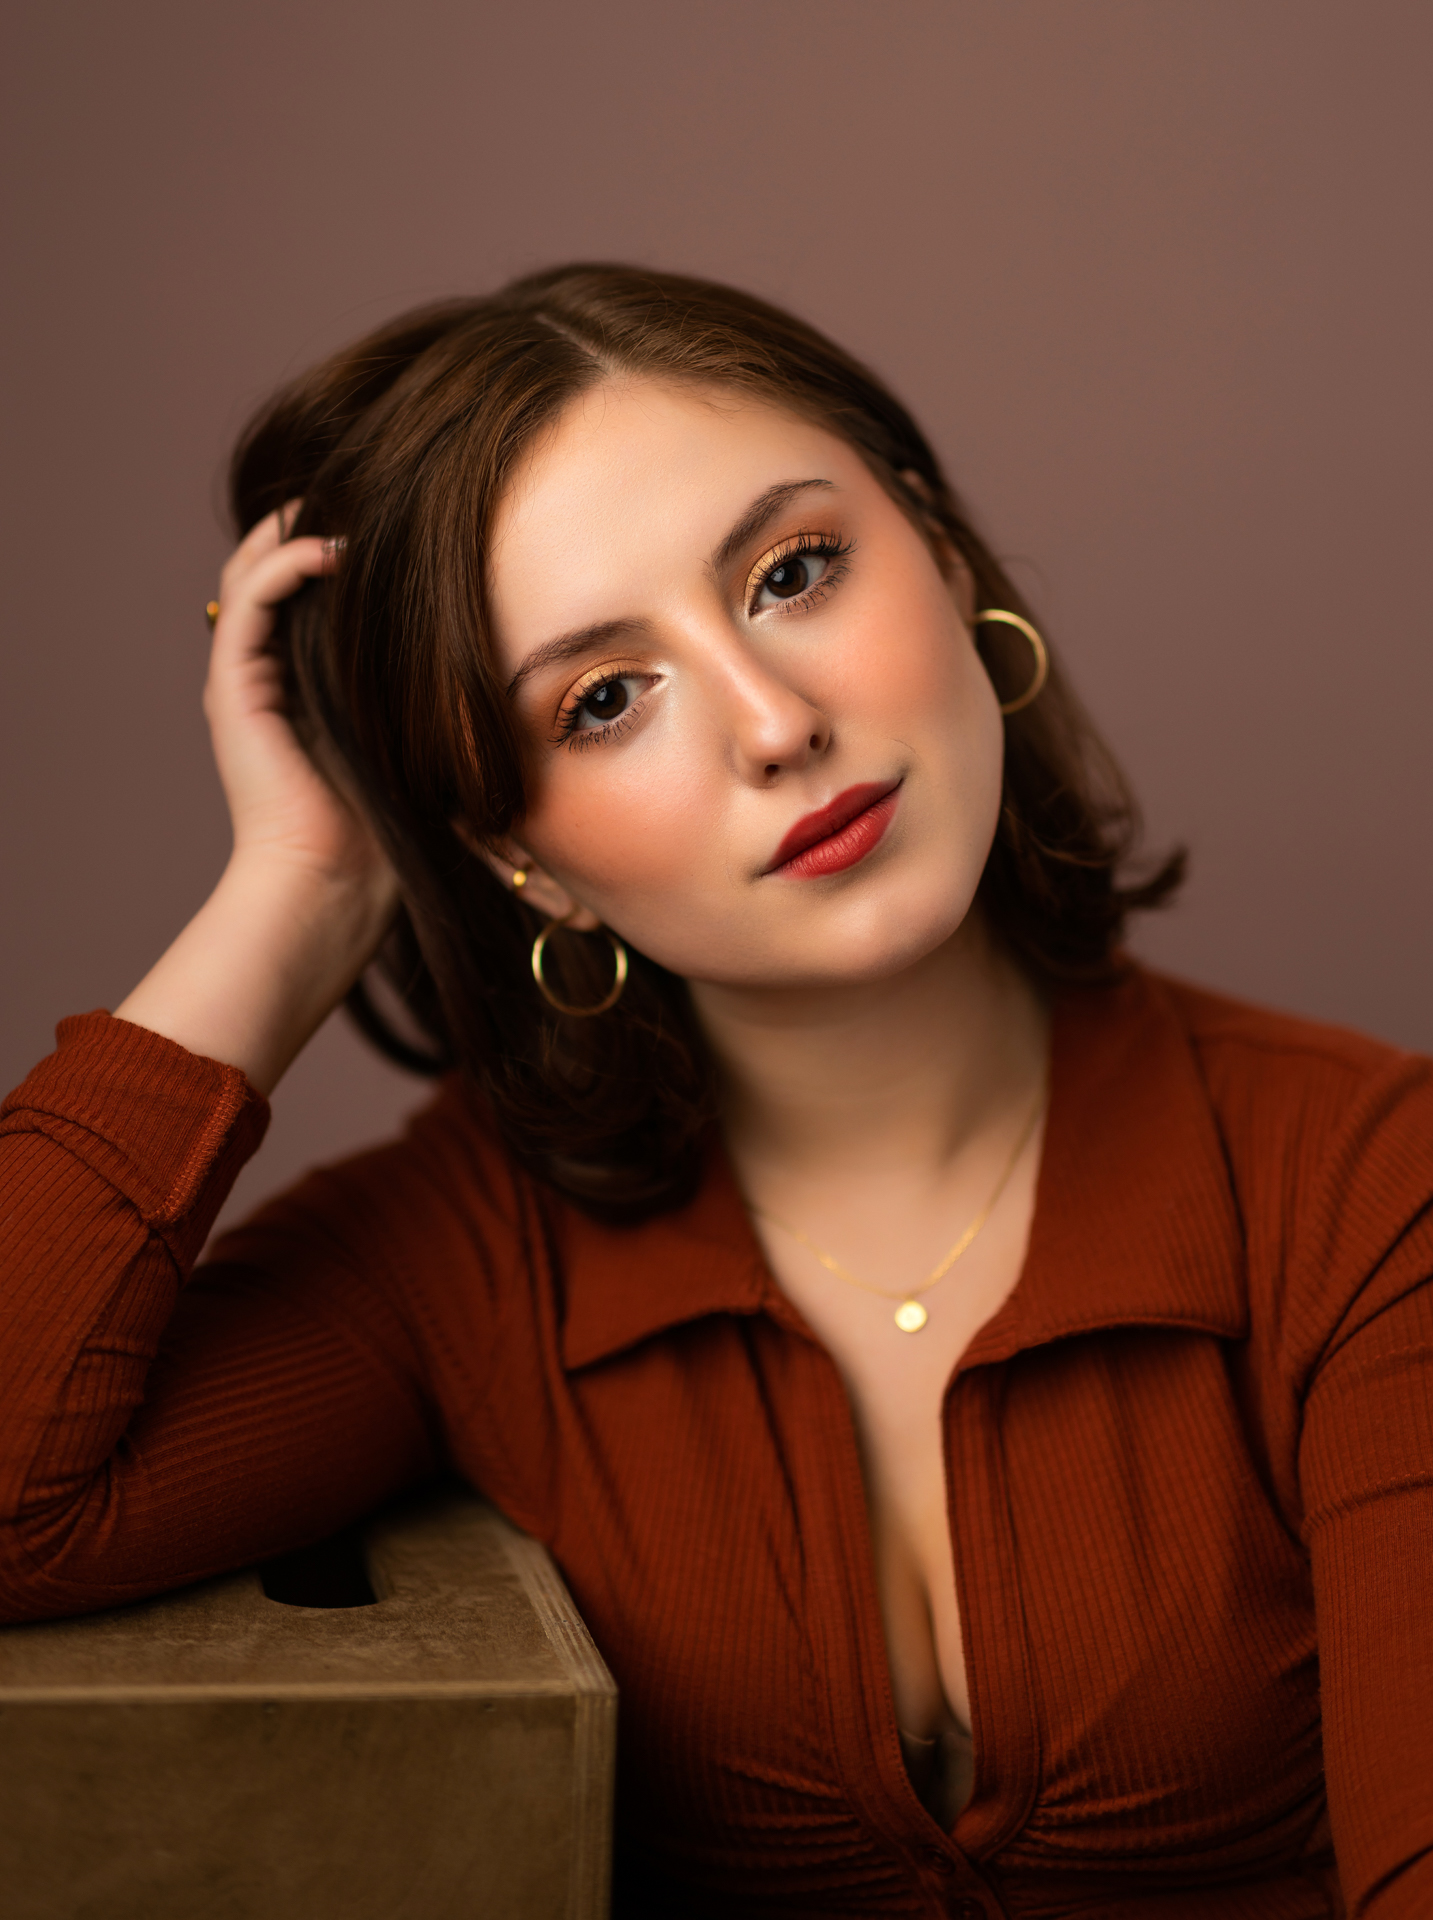 Professional musician headshot of young woman in burnt orange shirt on mauve background